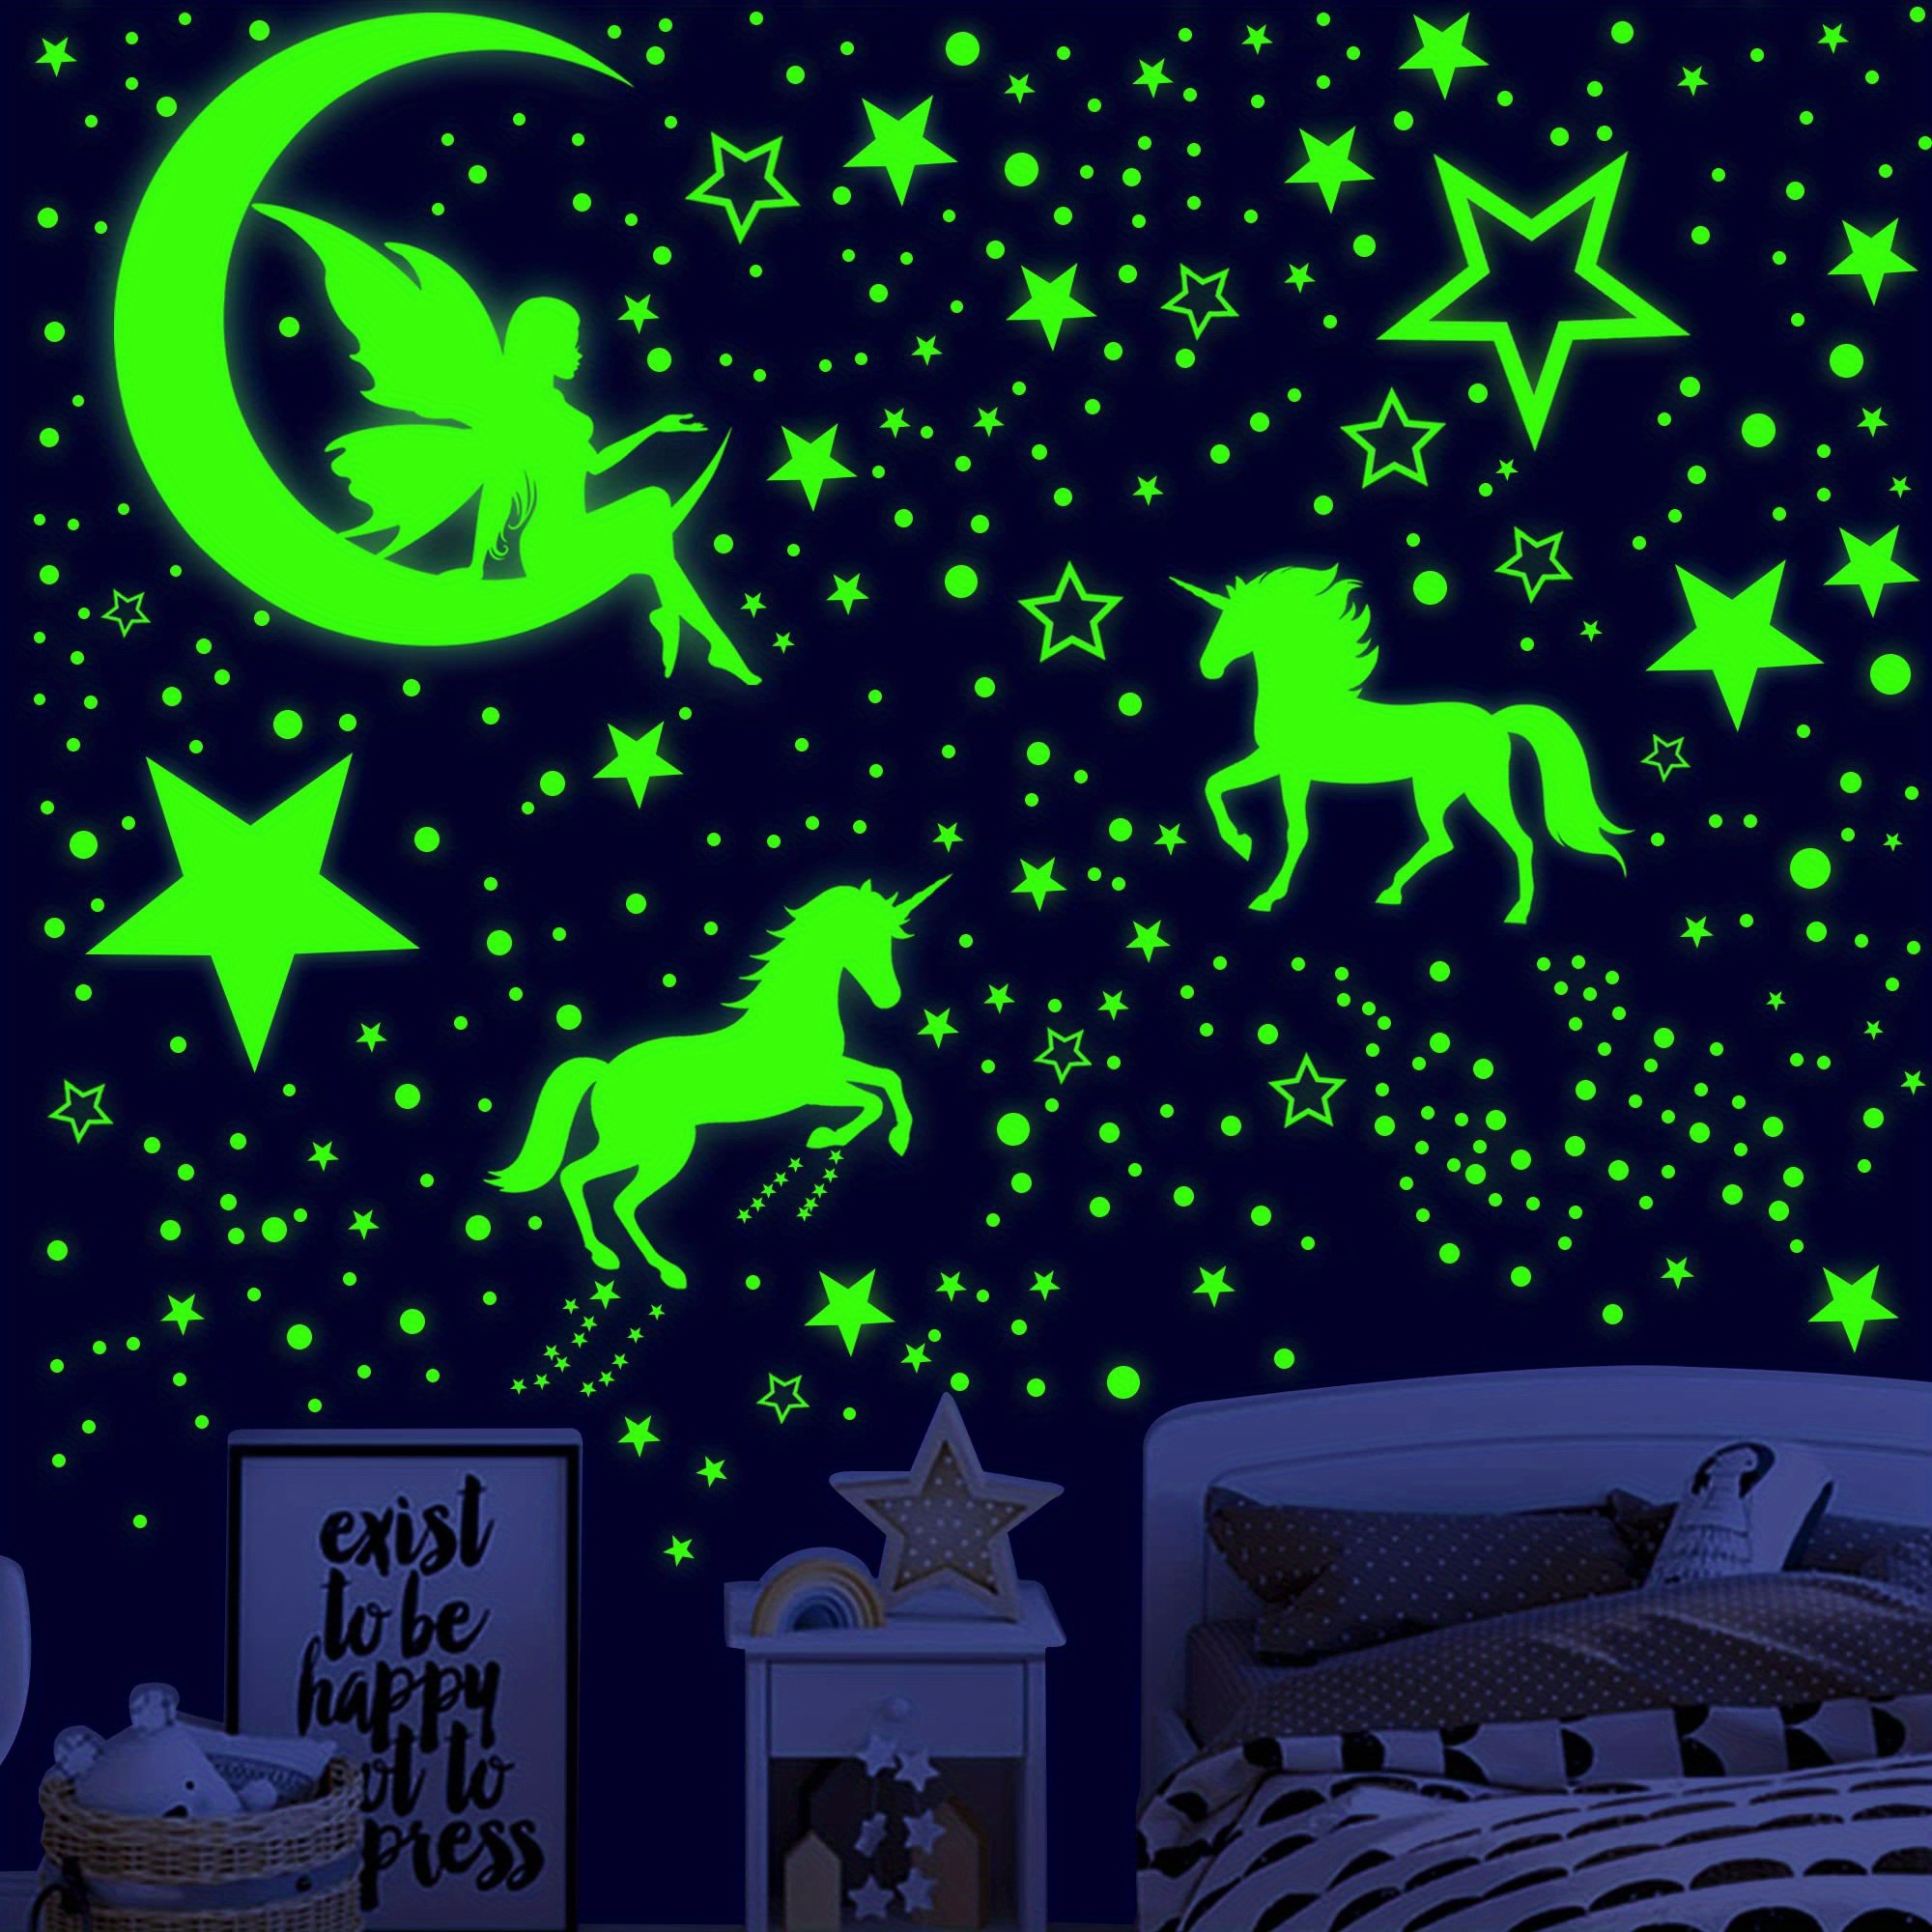 Glow In The Dark Stars And Unicorn Wall Decals, Glowing Castle Moon And  Rainbow Stickers, 174 Pcs Luminous Ceiling Decor For Kids Bedroom, Great  Wall